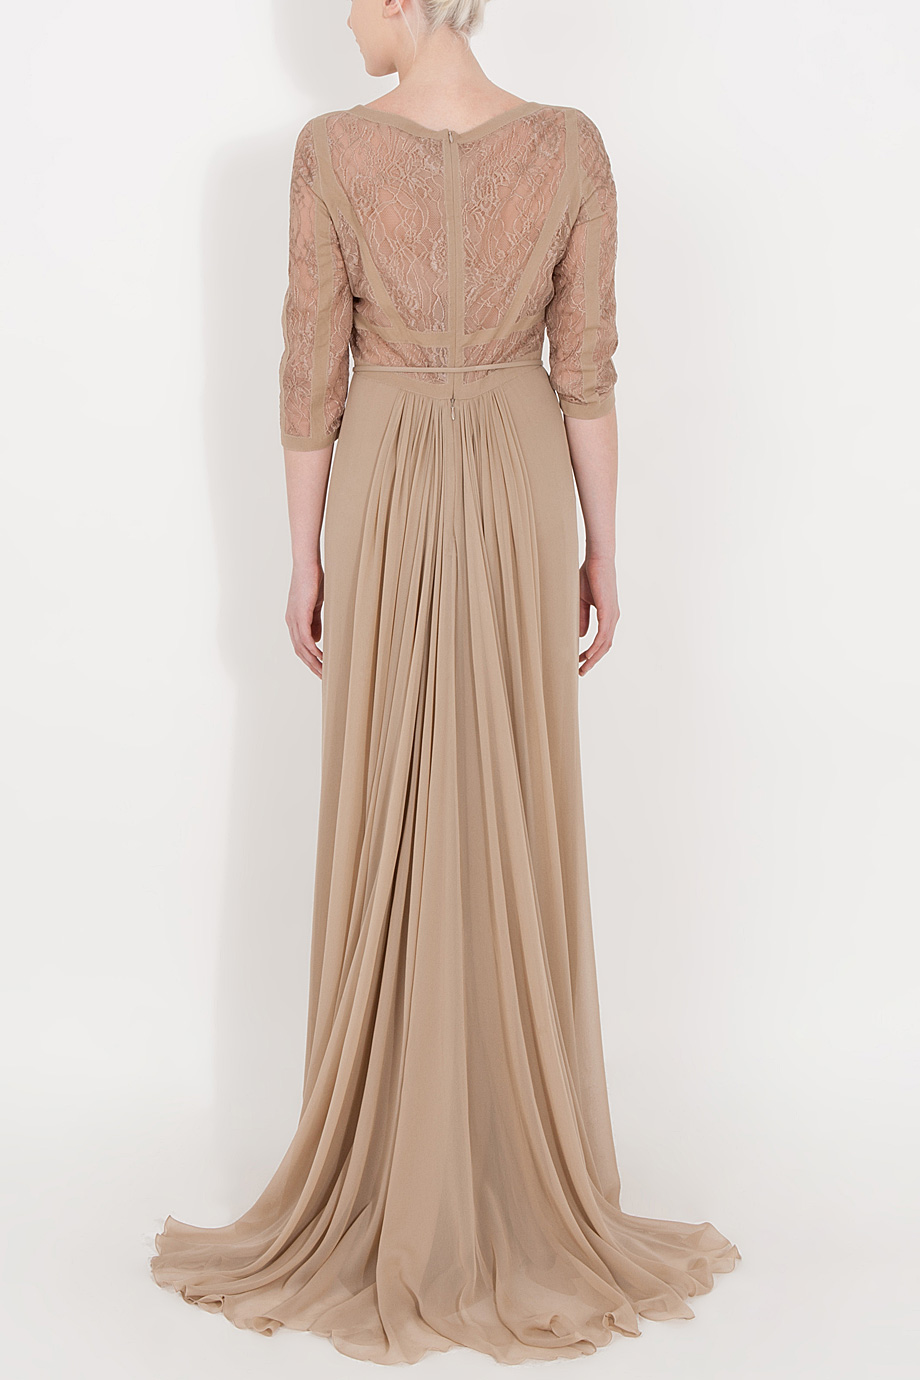 Lyst - Elie saab Sleeveless Lace Gown in Natural